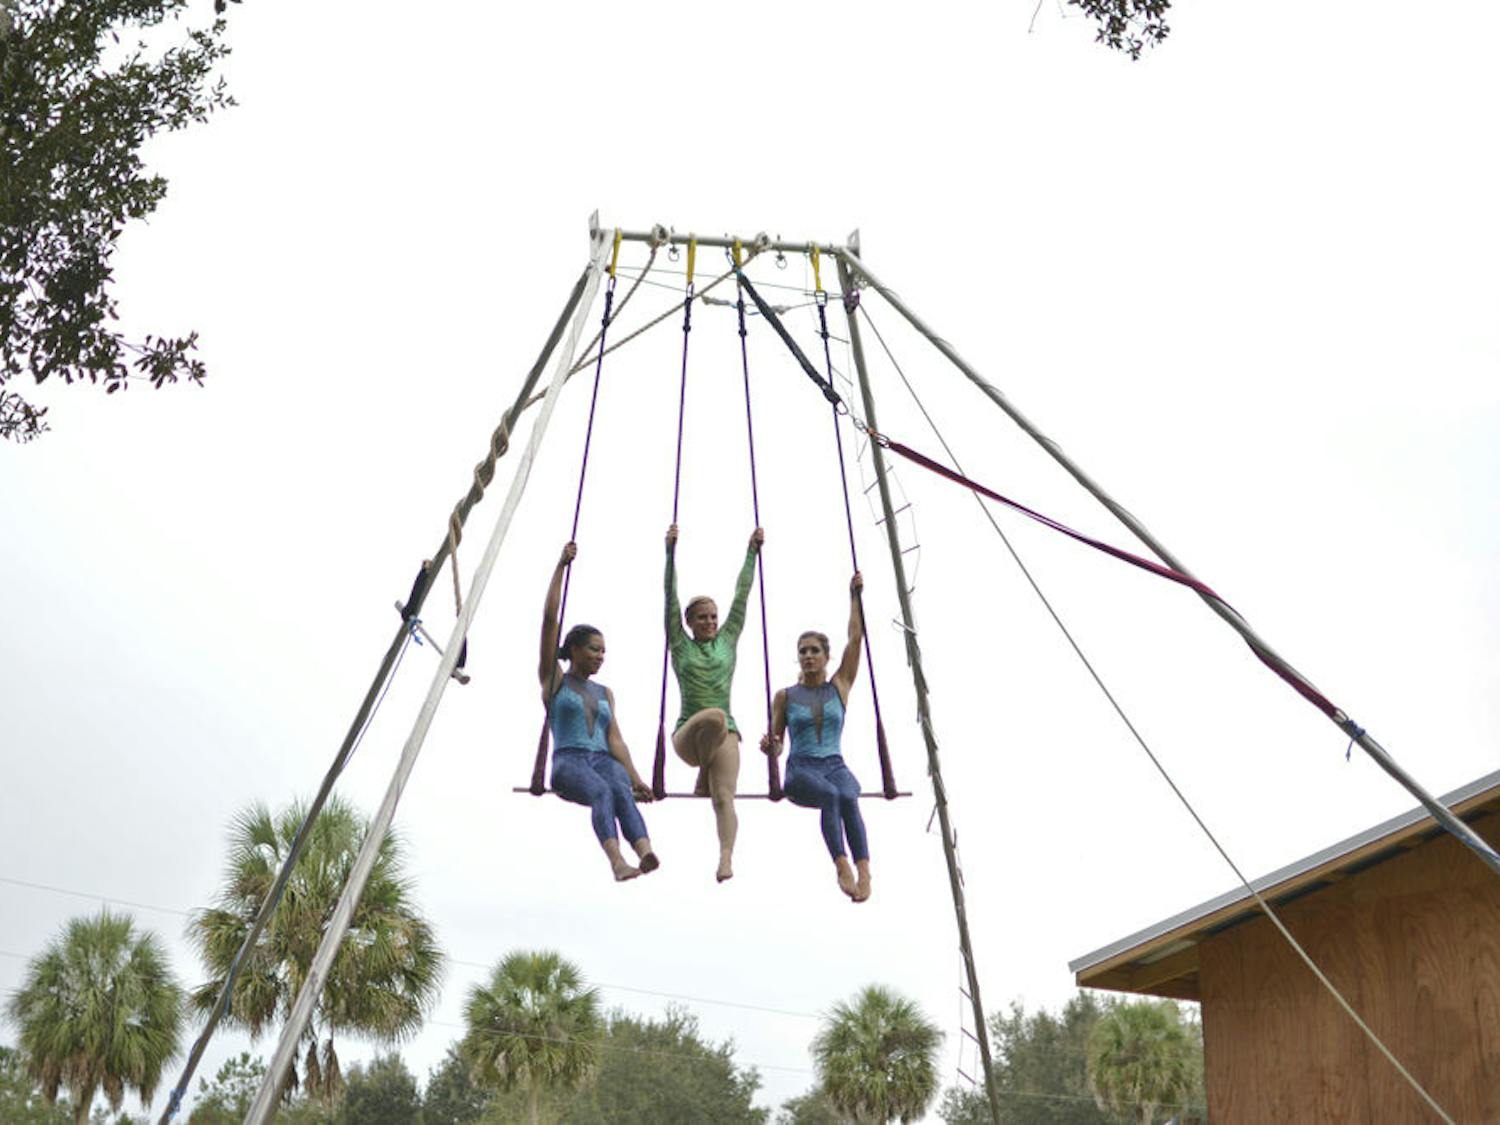 From left to right, Tatyana Kimble, Becca Burton, and Kelly Ulmer perform trapeze at the “Country Circus: Aquatic Dream Show” at Two Hawk Hammock in Williston on Nov. 21, 2015.